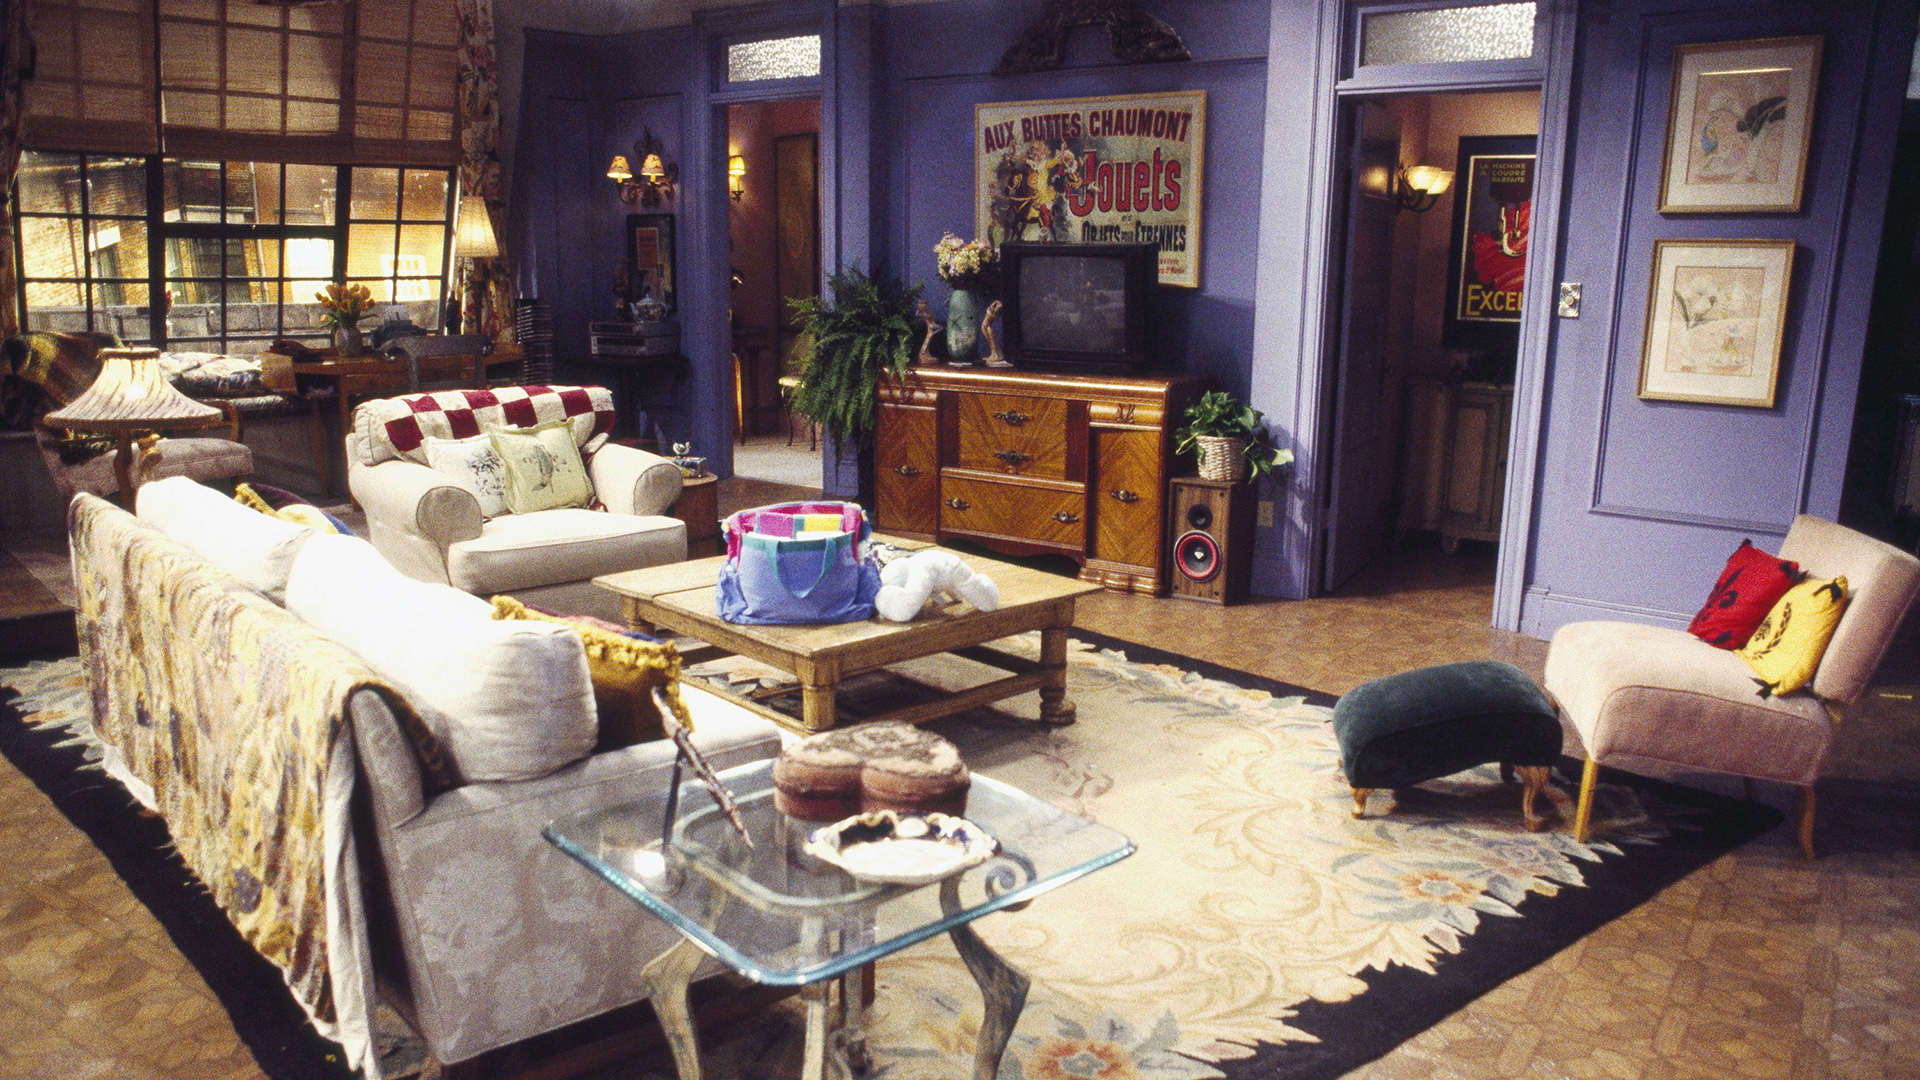 Can You Guess the 90’s Show Based on the Living Room?